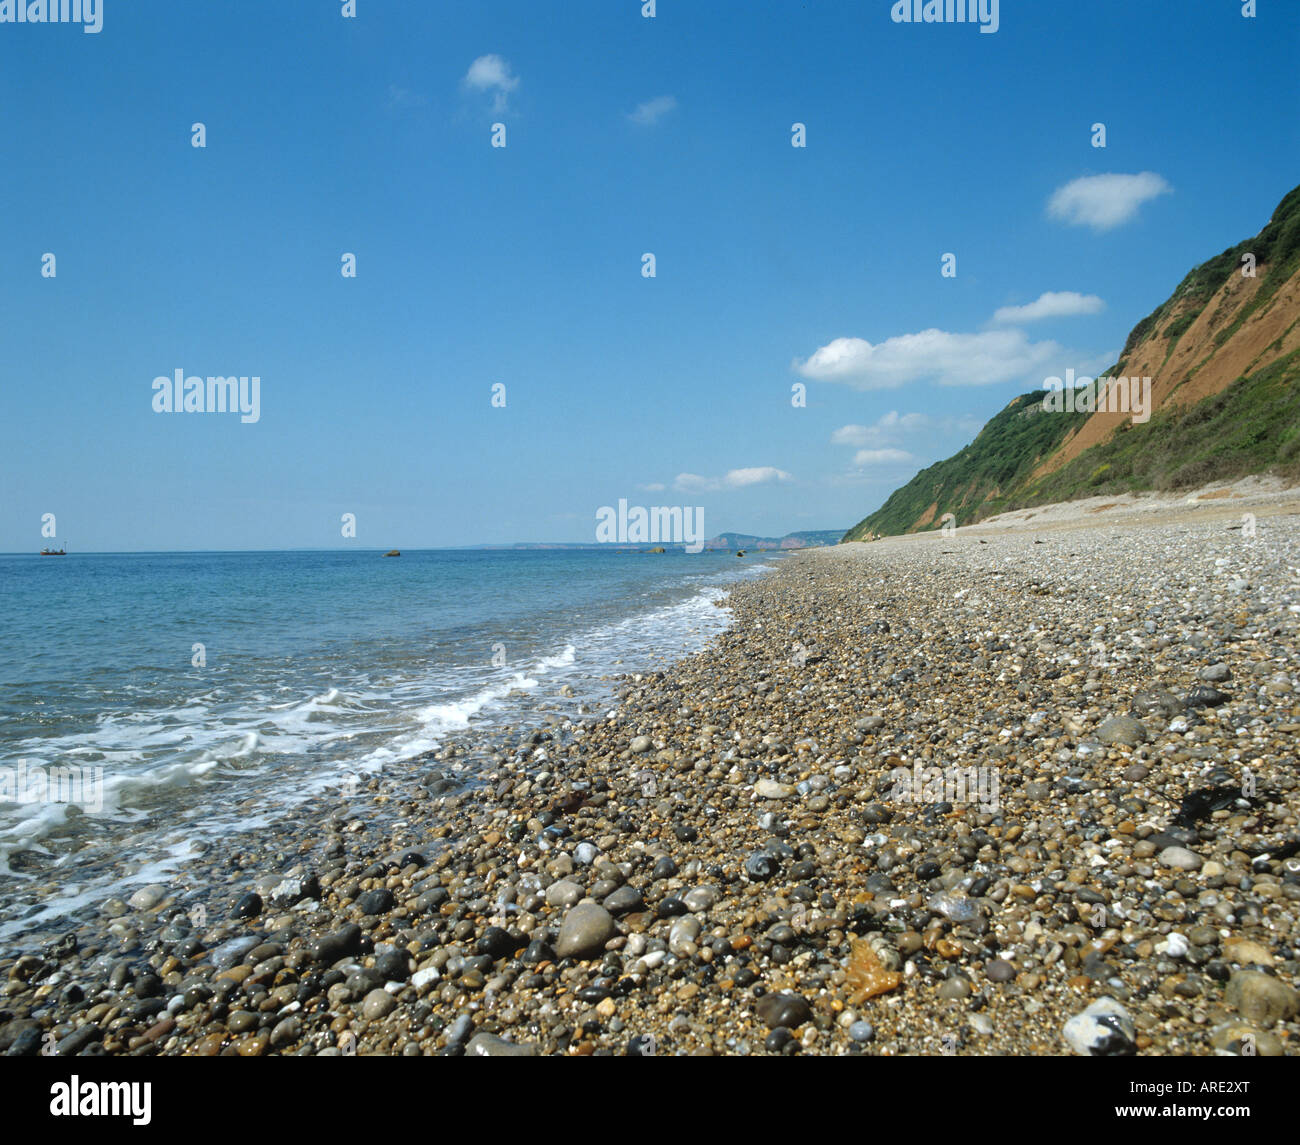 Shoreline of the pebble beach at Branscombe with high sandstone cliffs Stock Photo